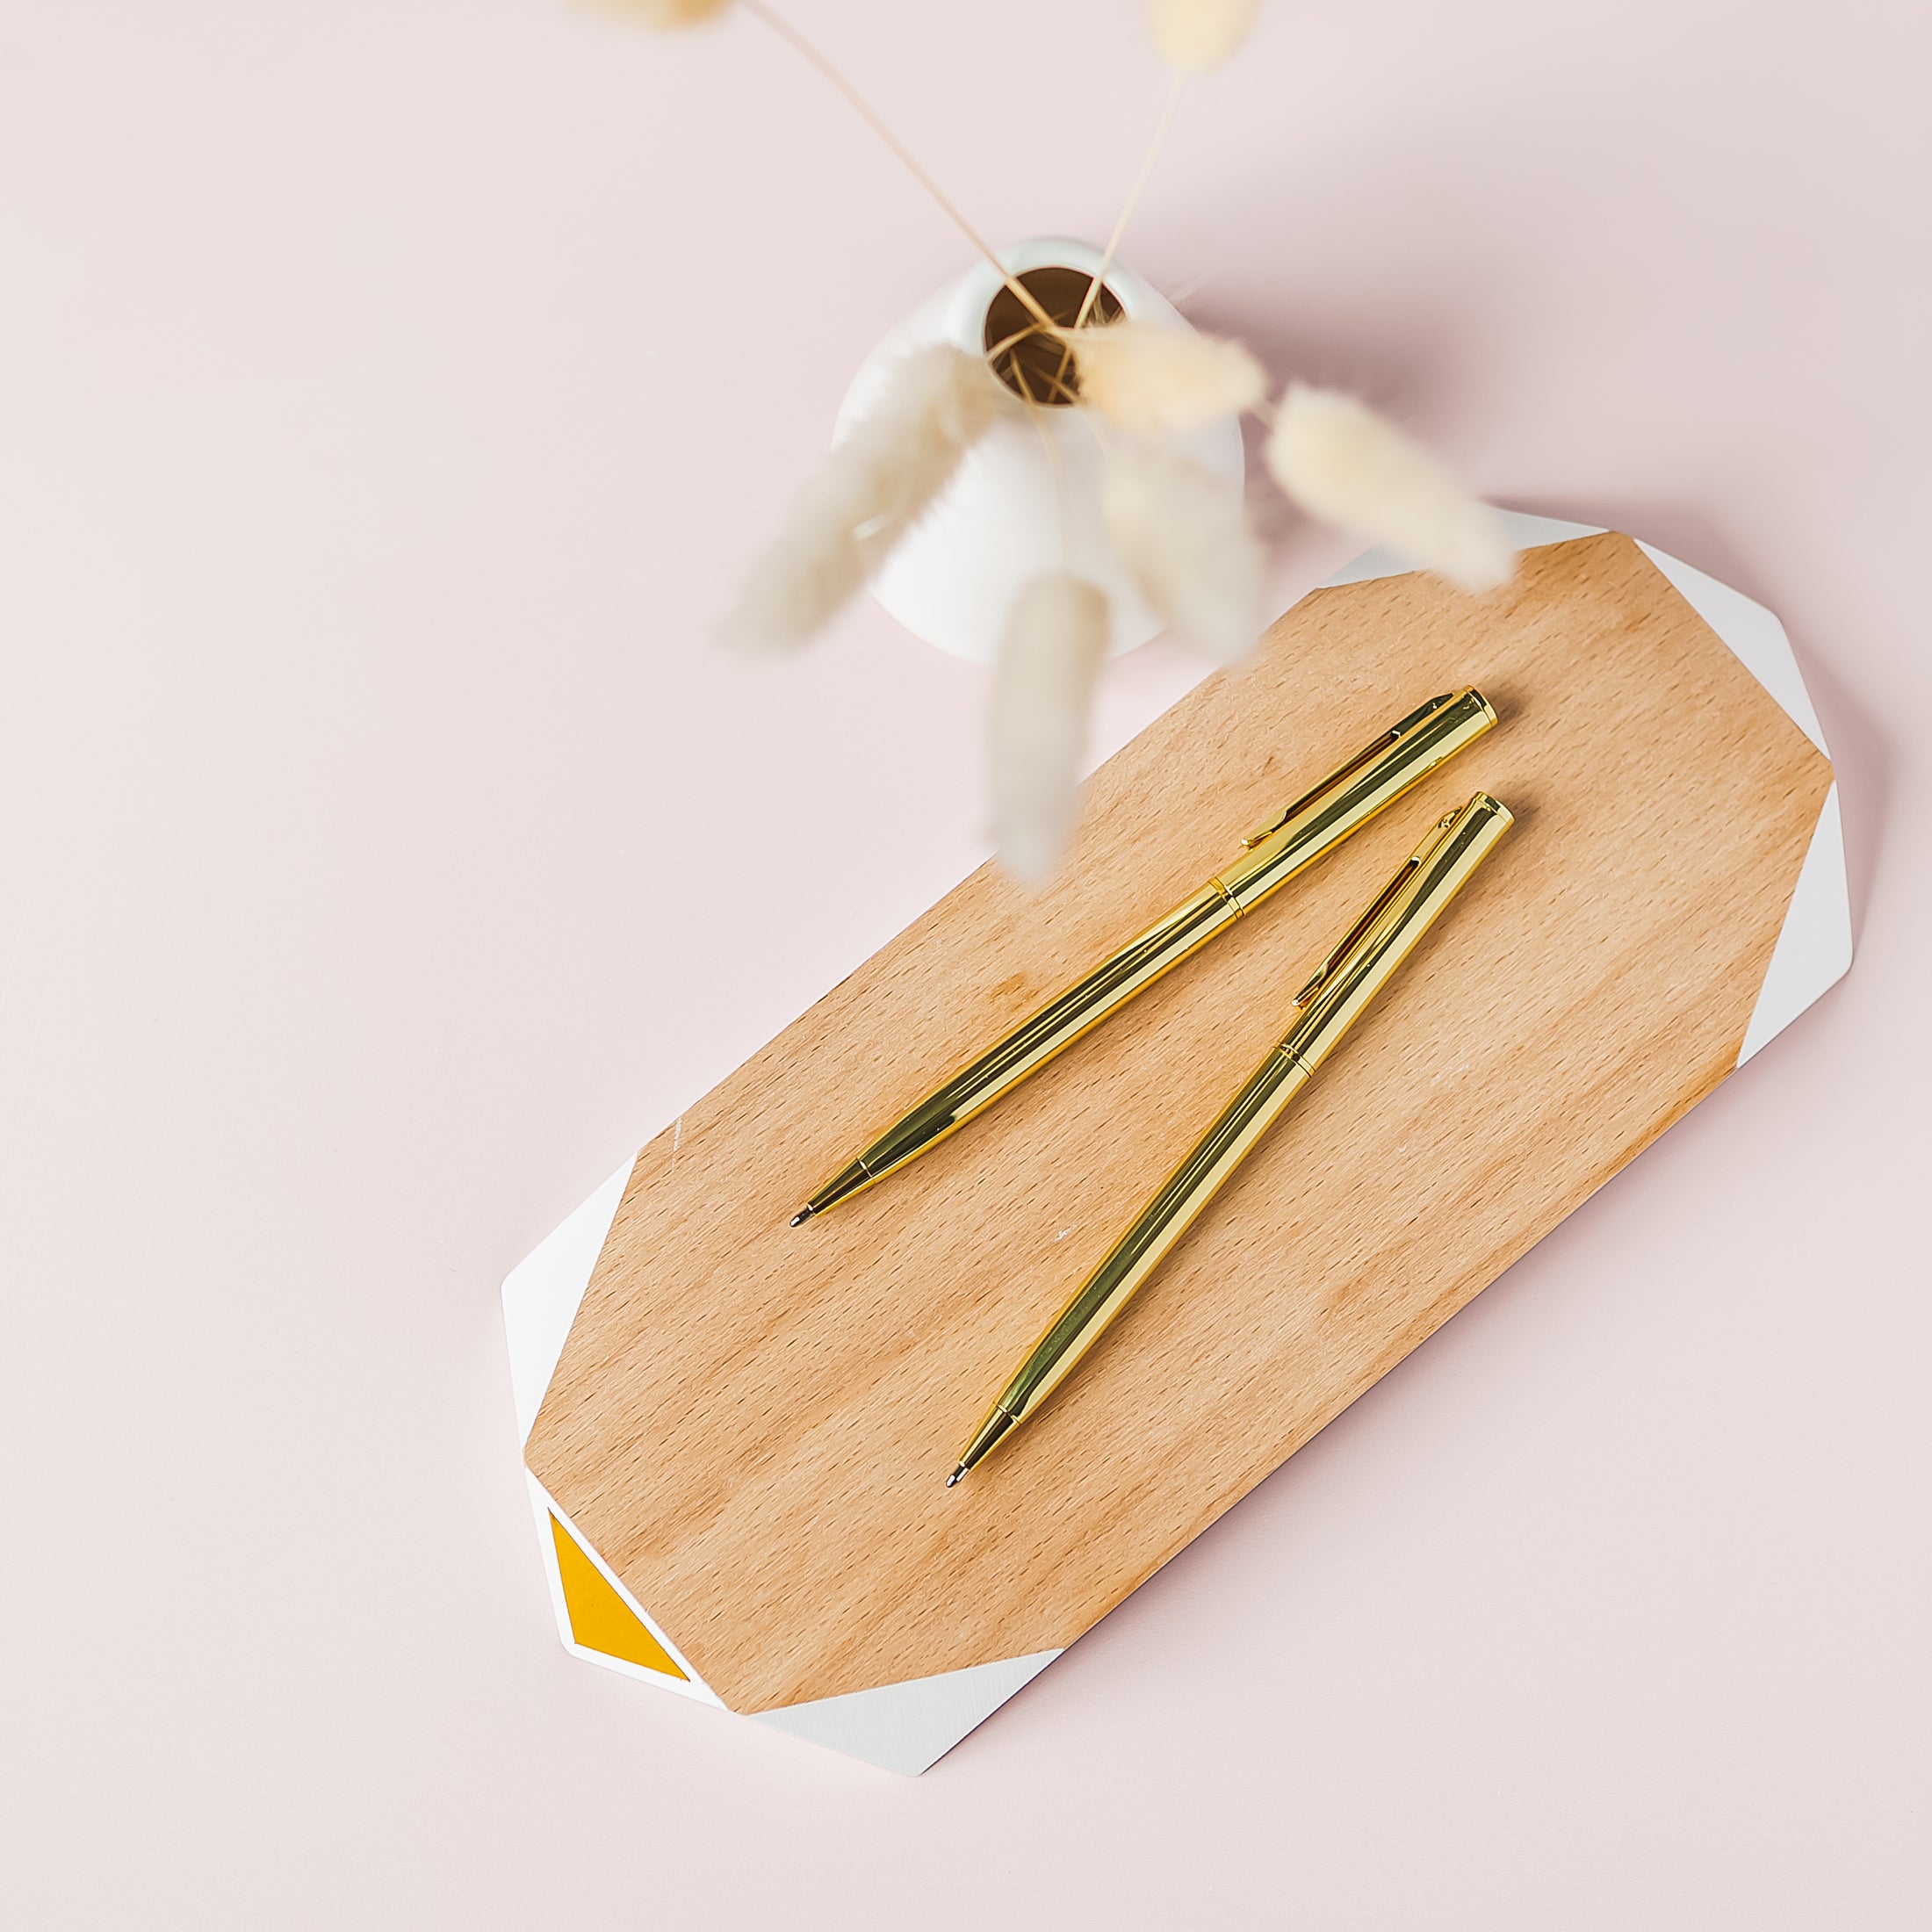 a wooden cutting board topped with two gold colored pens